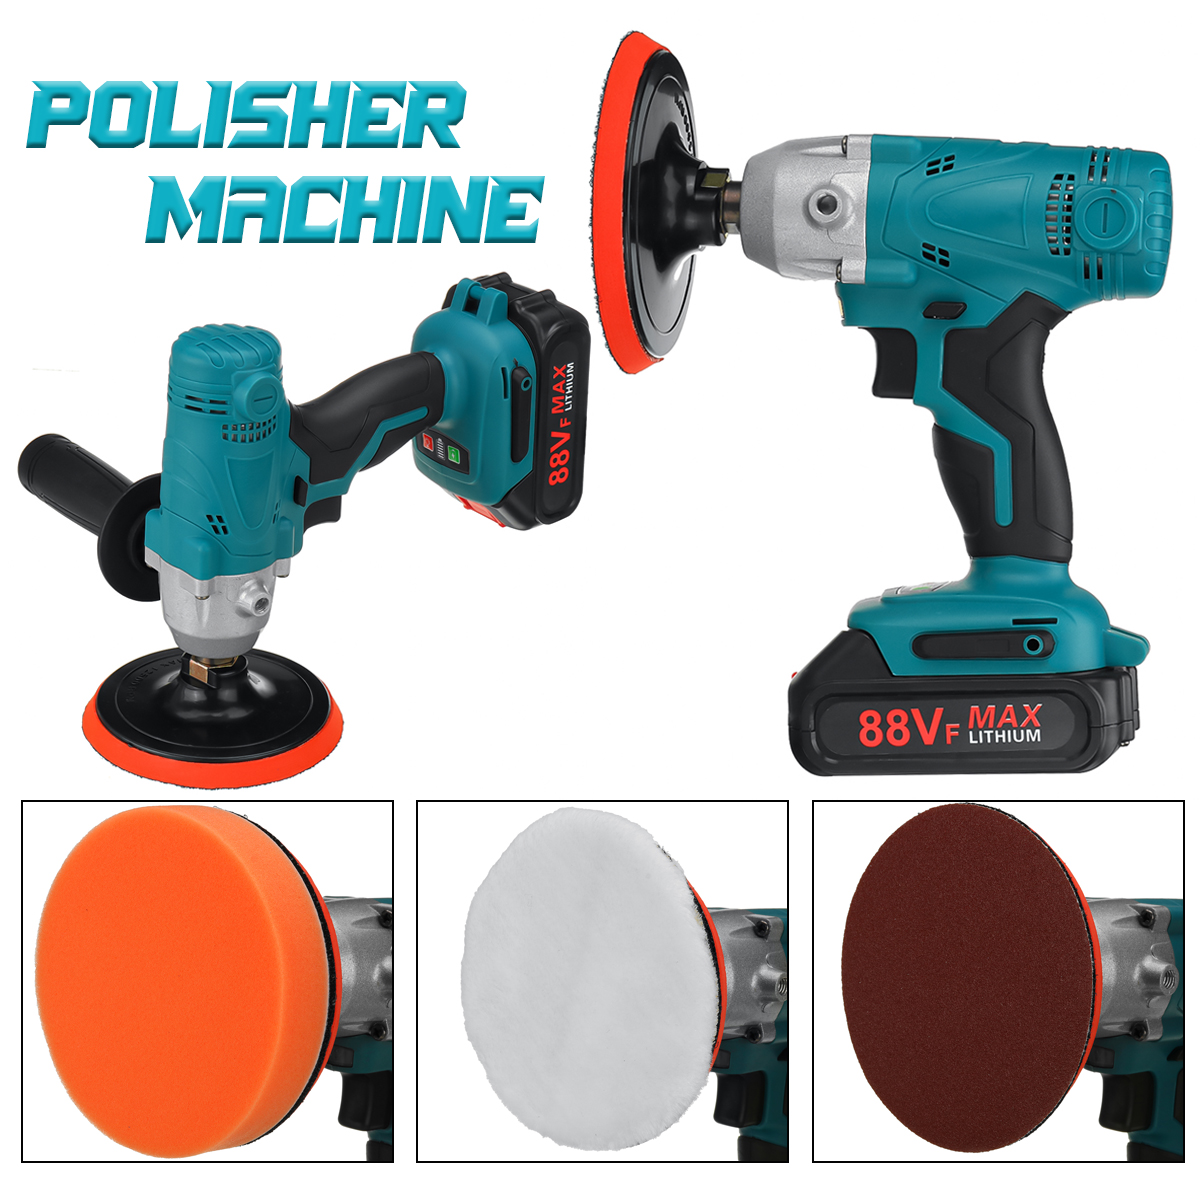 2-In-1-Polisher-Drill-Cordless-Electric-Drilling-Polishing-Machine-Car-Polisher-Power-Tool-Converter-1889909-4